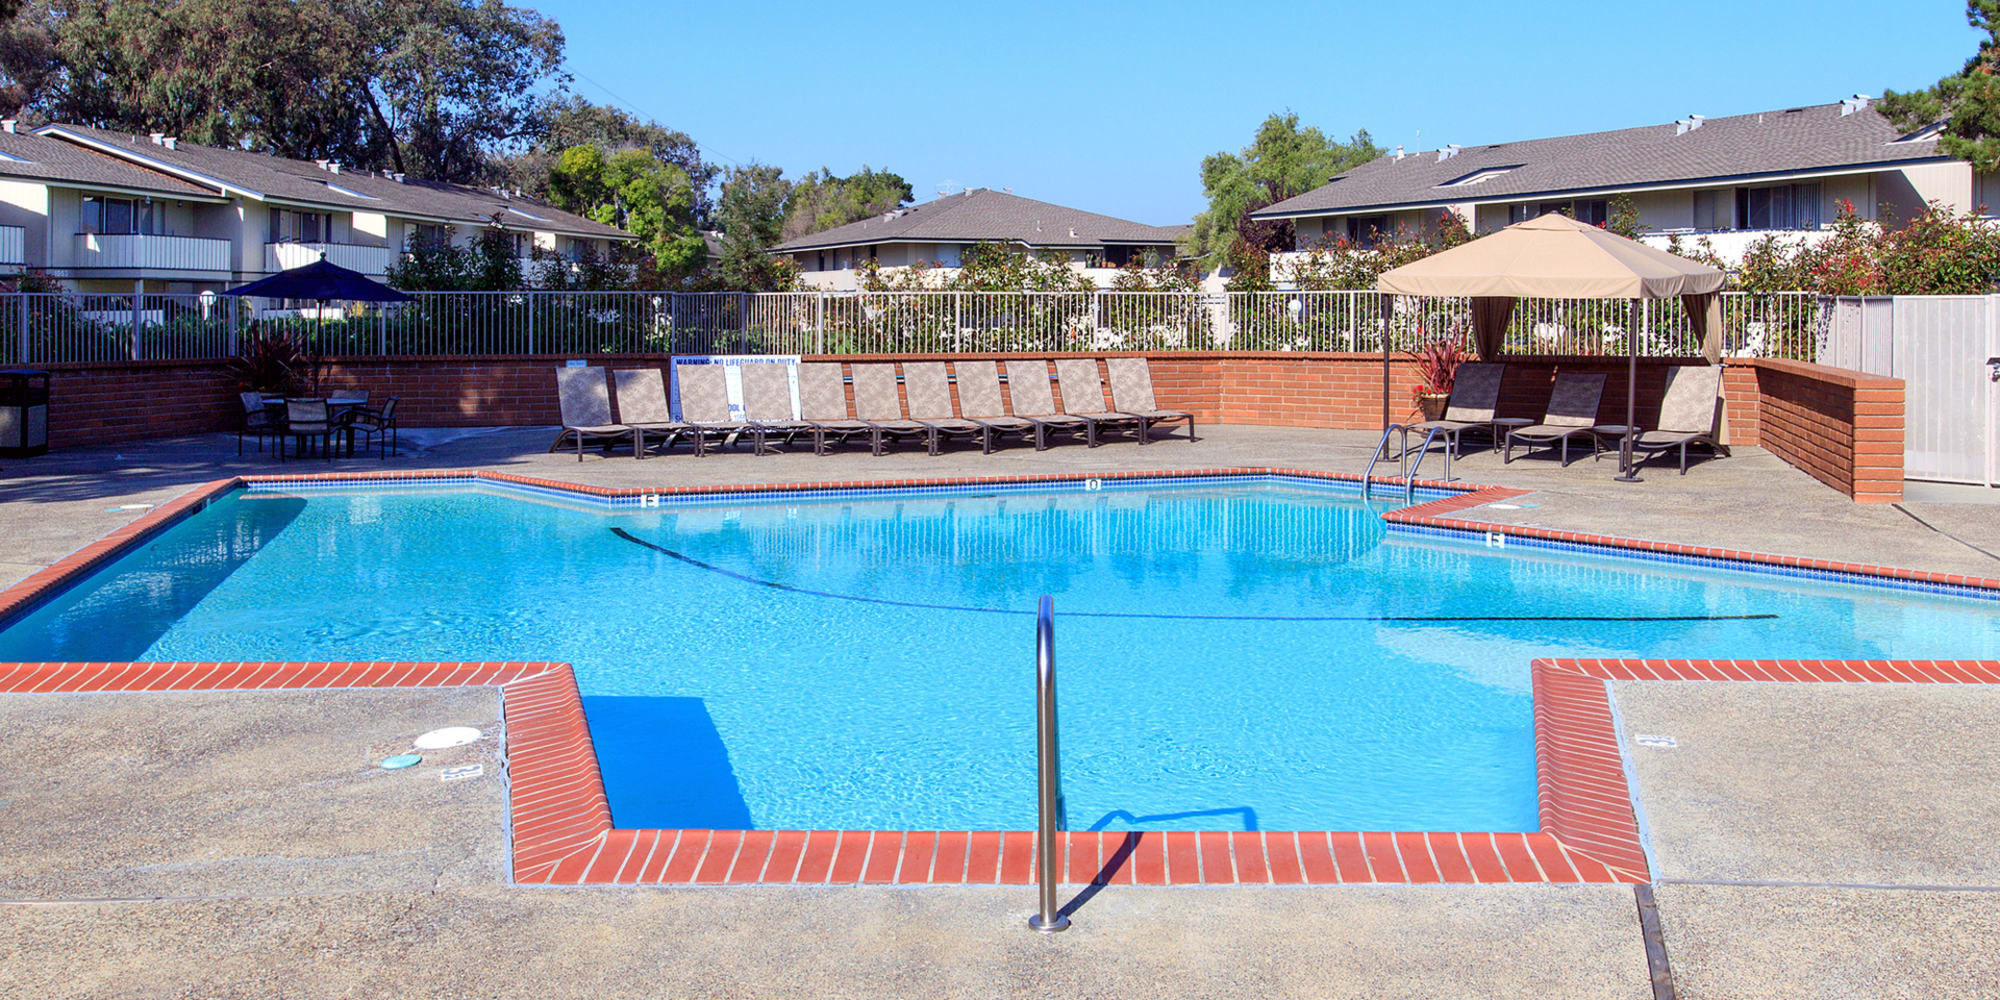 Pool area at Shadow Cove in Foster City, California